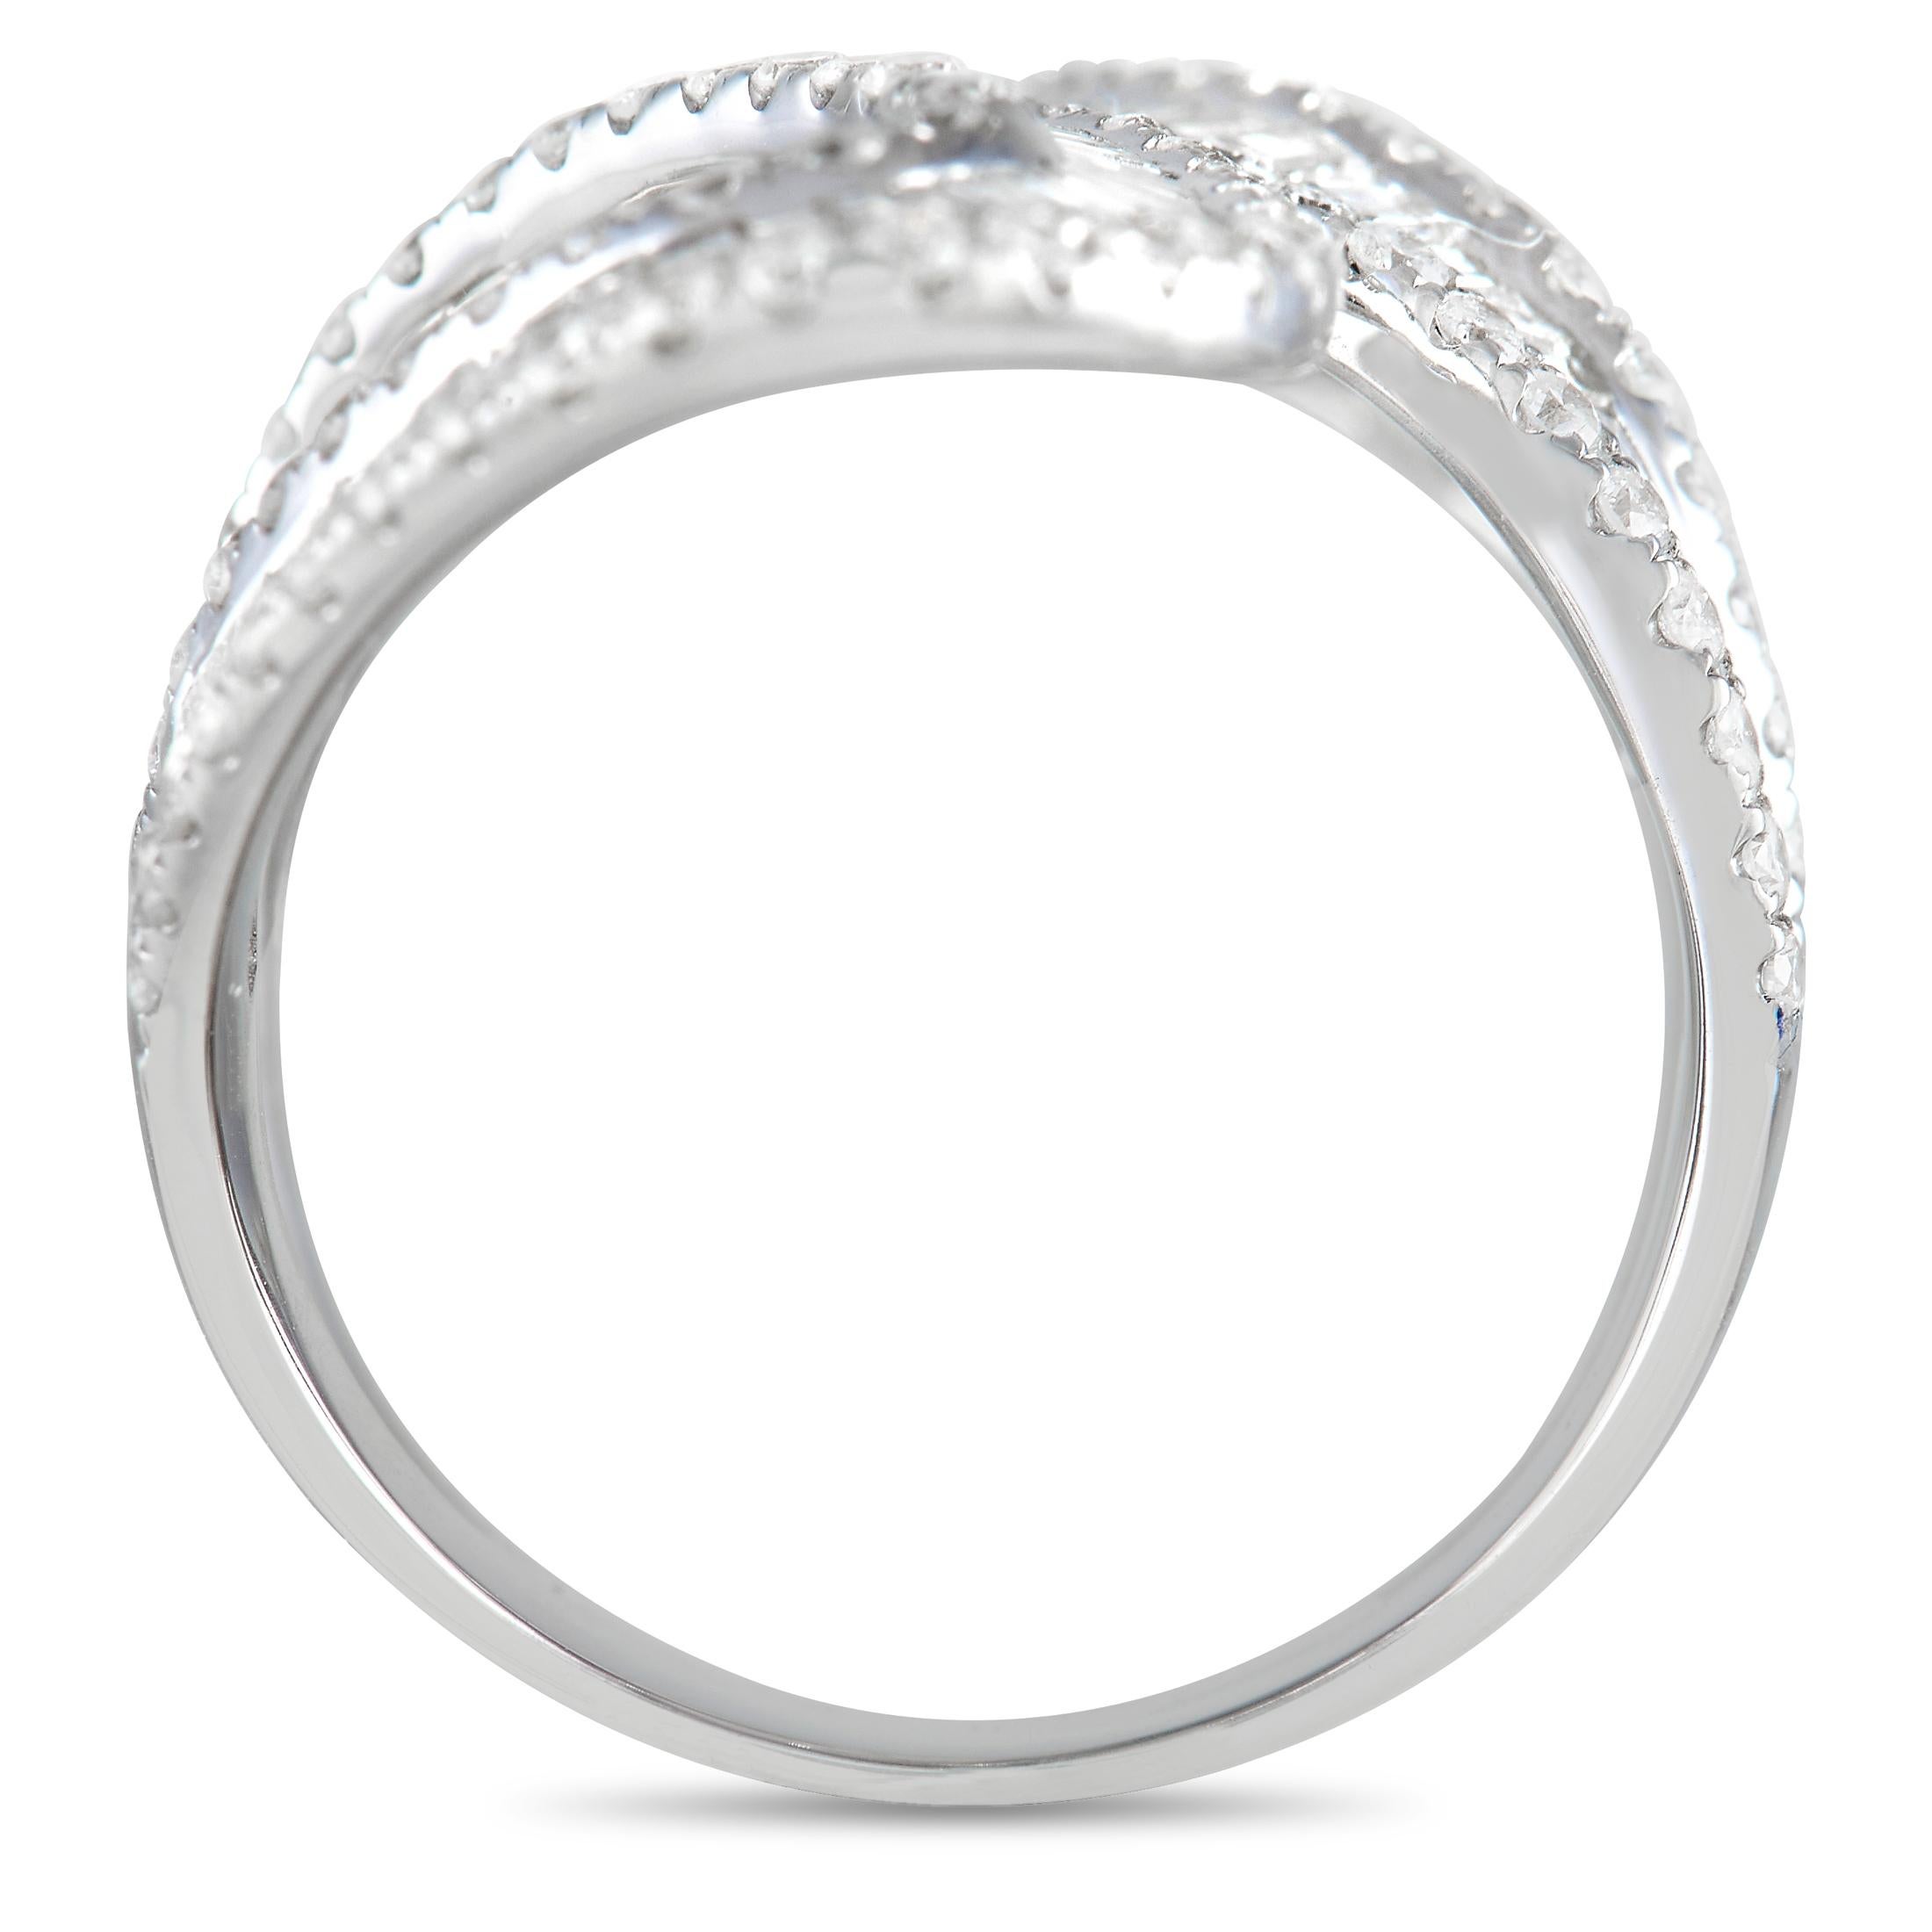 A mesmerizing addition to your jewelry collection. This diamond ring is fashioned from 14K white gold and is designed with a wide split-bypass shank. Looking like a glittering ribbon on the finger, the band has its swirly top covered entirely with